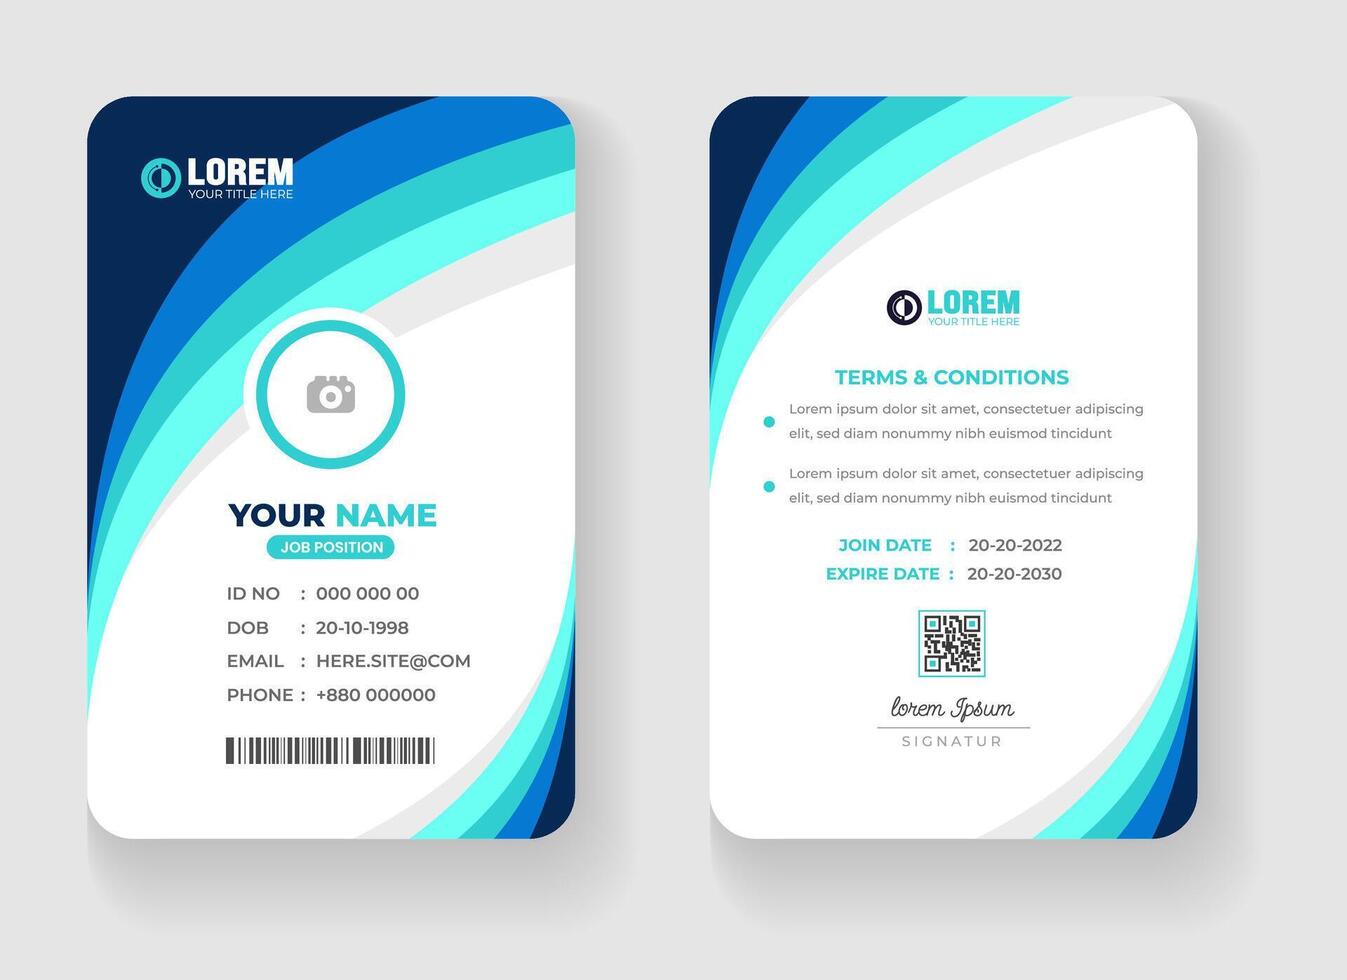 corporate Modern office Identity Card or elegant business company id card design template. vector